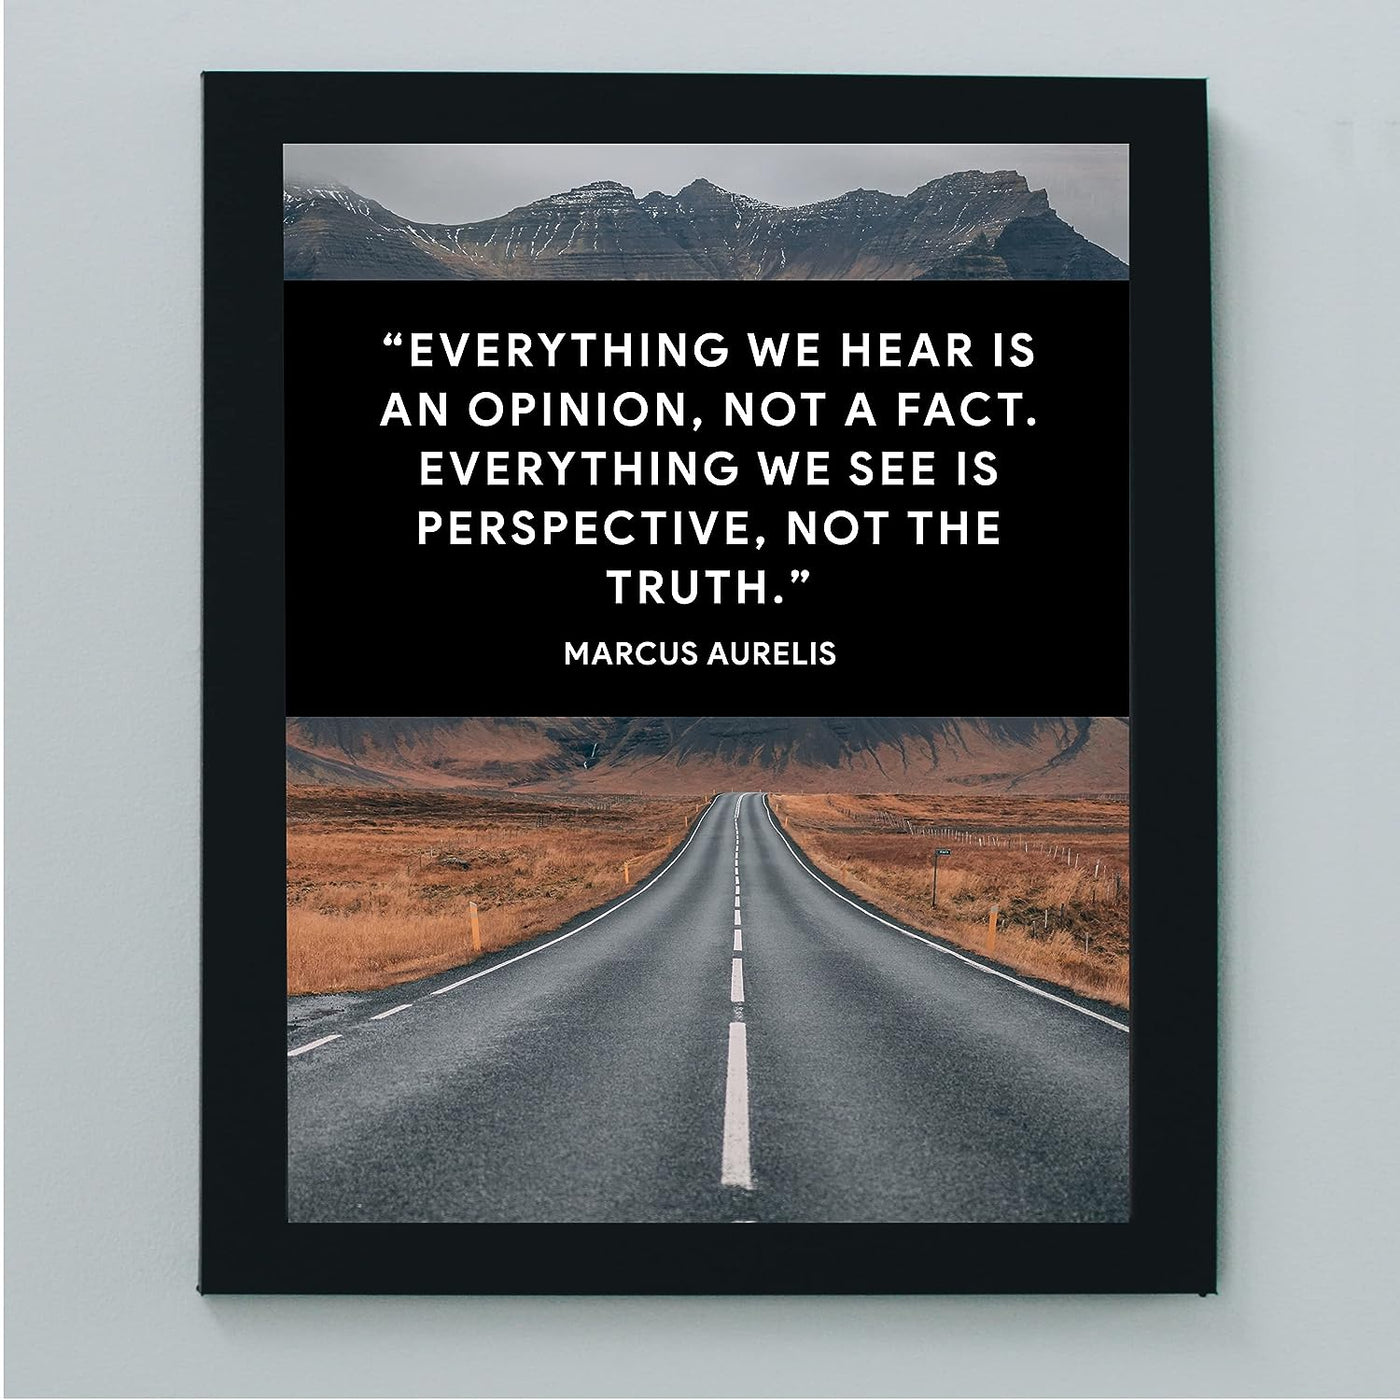 Marcus Aurelius-"Everything We See -Not Truth"-Motivational Quotes Wall Art -8x10" Inspirational Mountain Road Picture Print -Ready to Frame. Vintage Philosophy Quote for Home-Office-Classroom Decor!